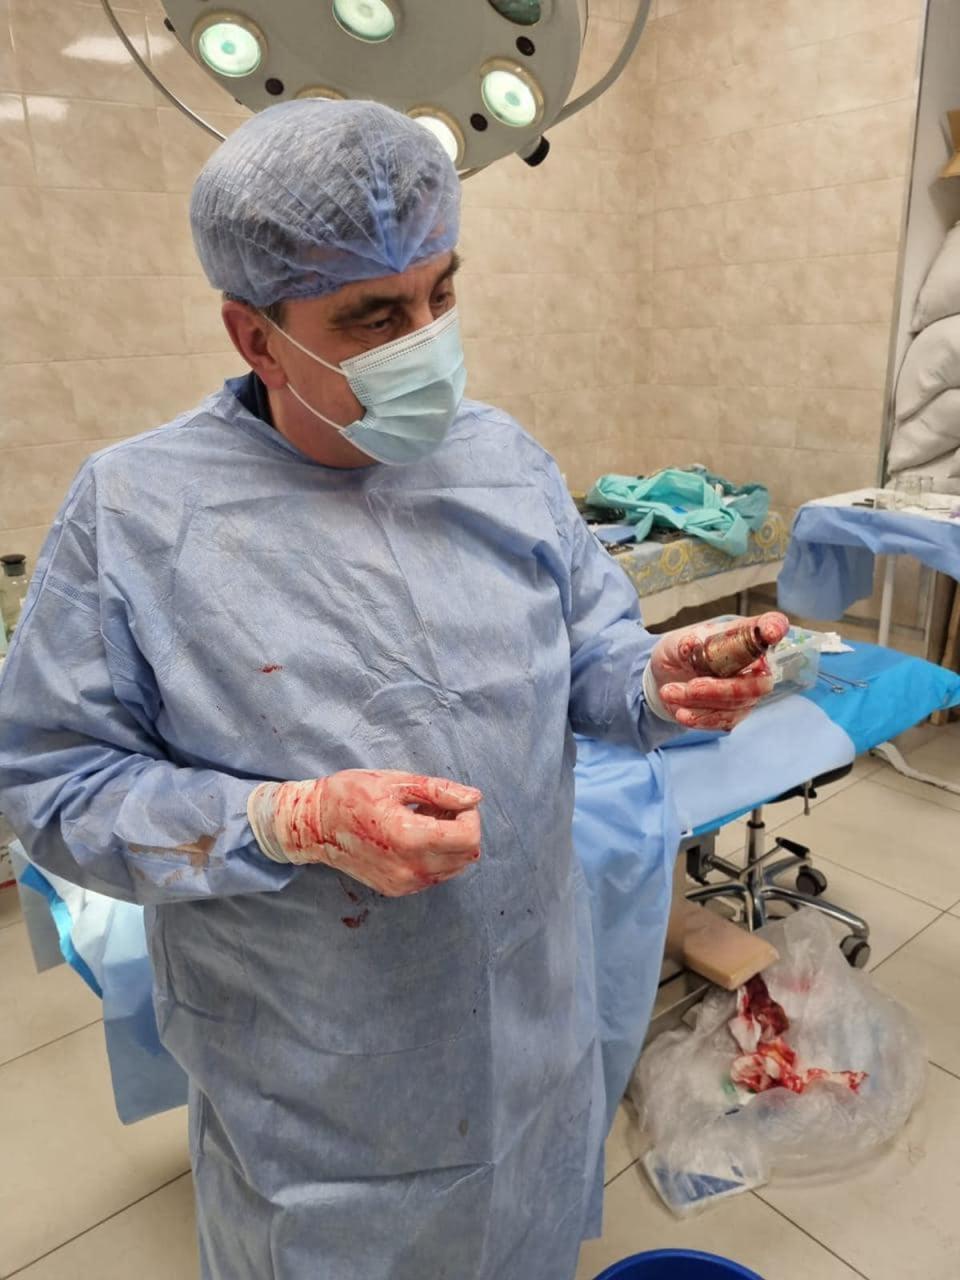 The operation was carried out succesfully, according to Maliar, by one of the most experienced surgeons in Ukraine’s armed forces (Hanna Maliar/ Facebook)